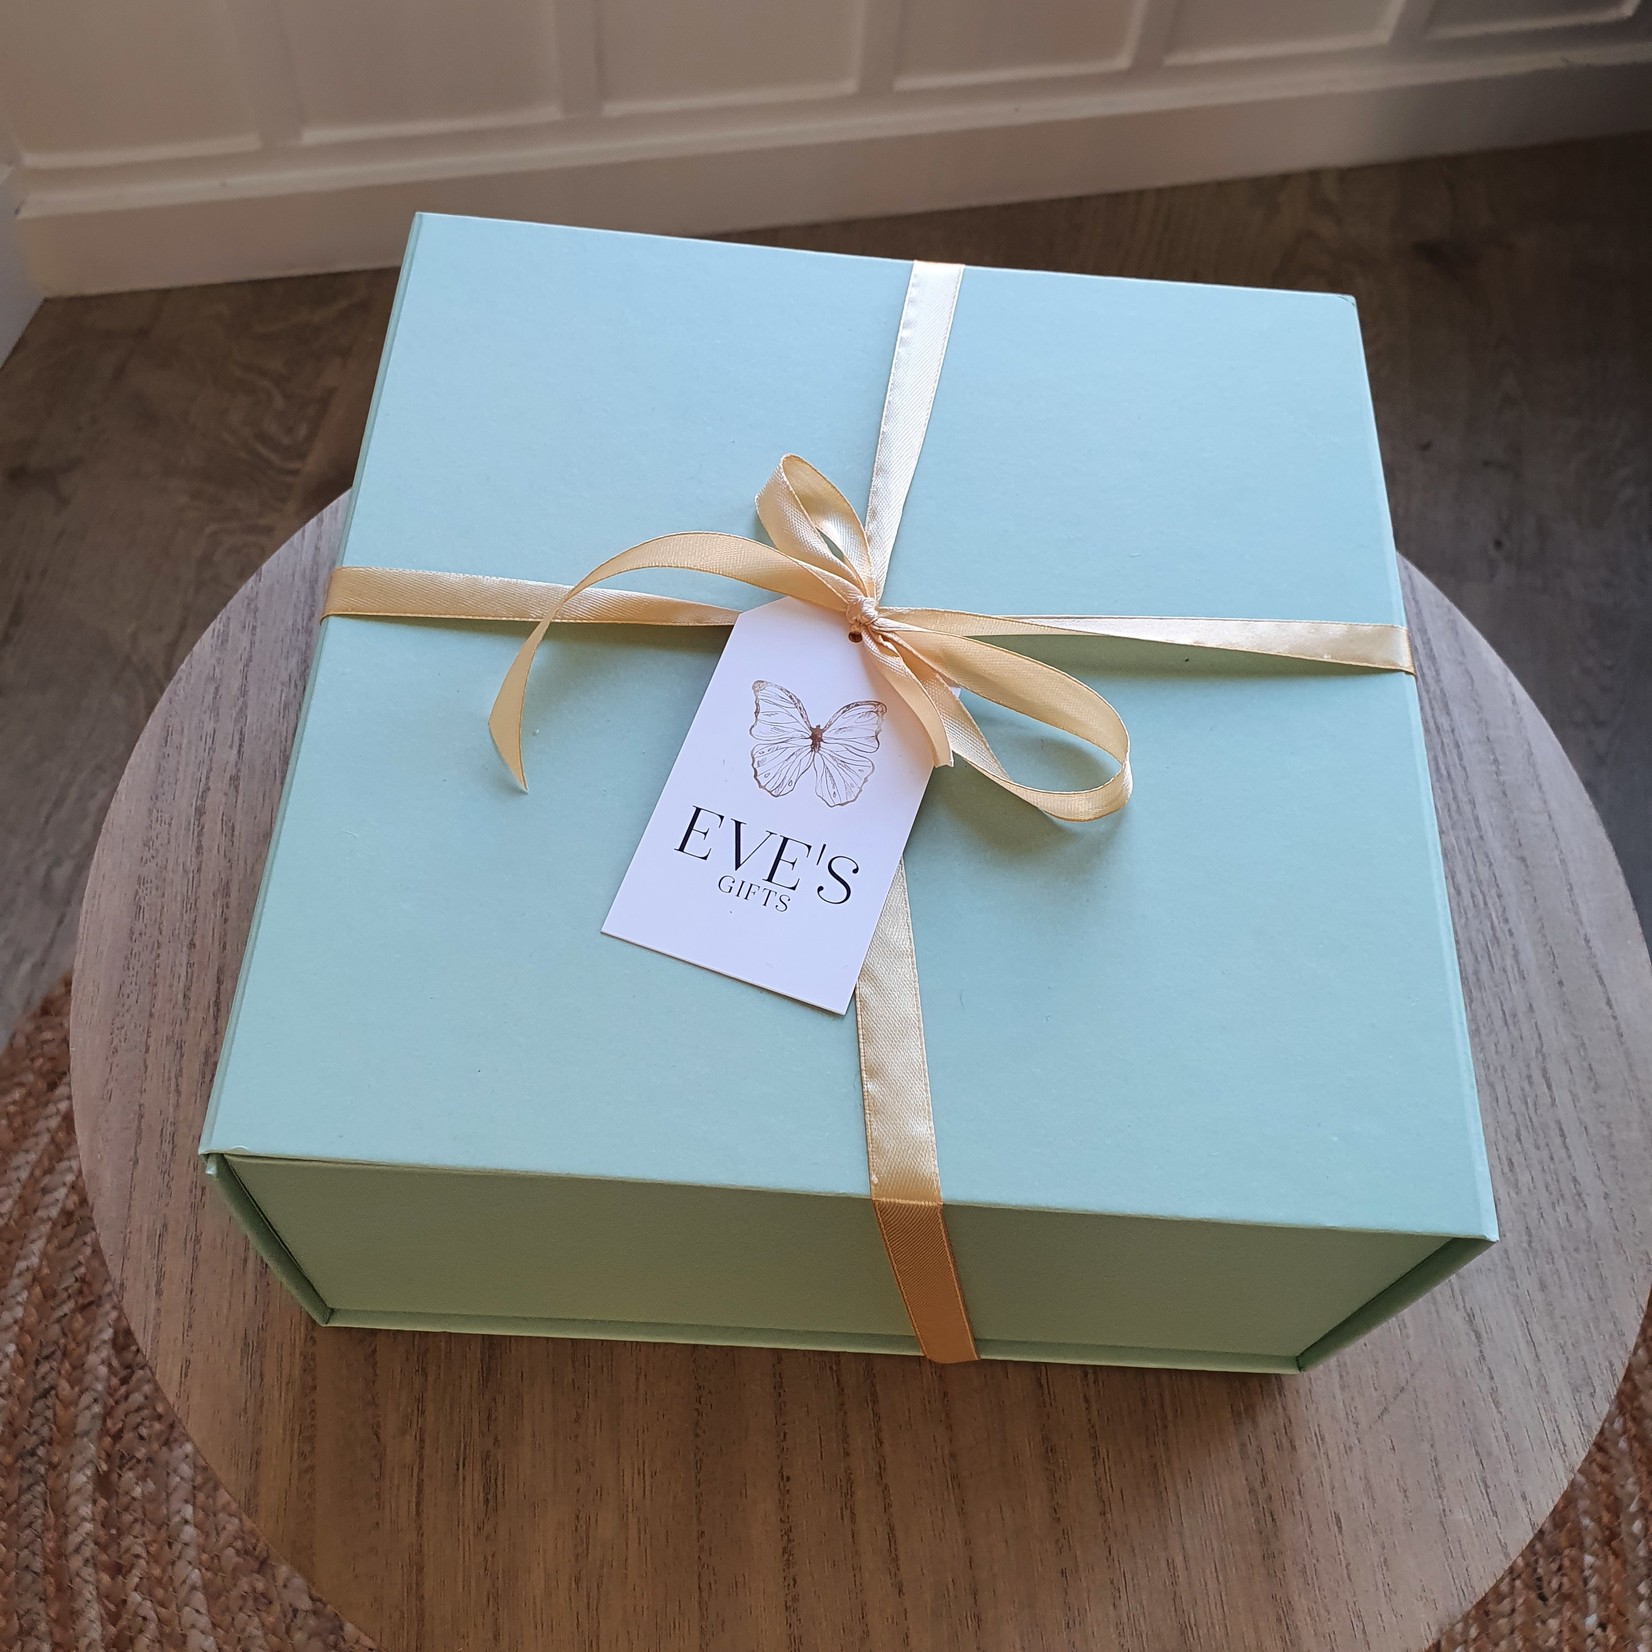 Eve's Gifts Mint Gift Box - You are Golden